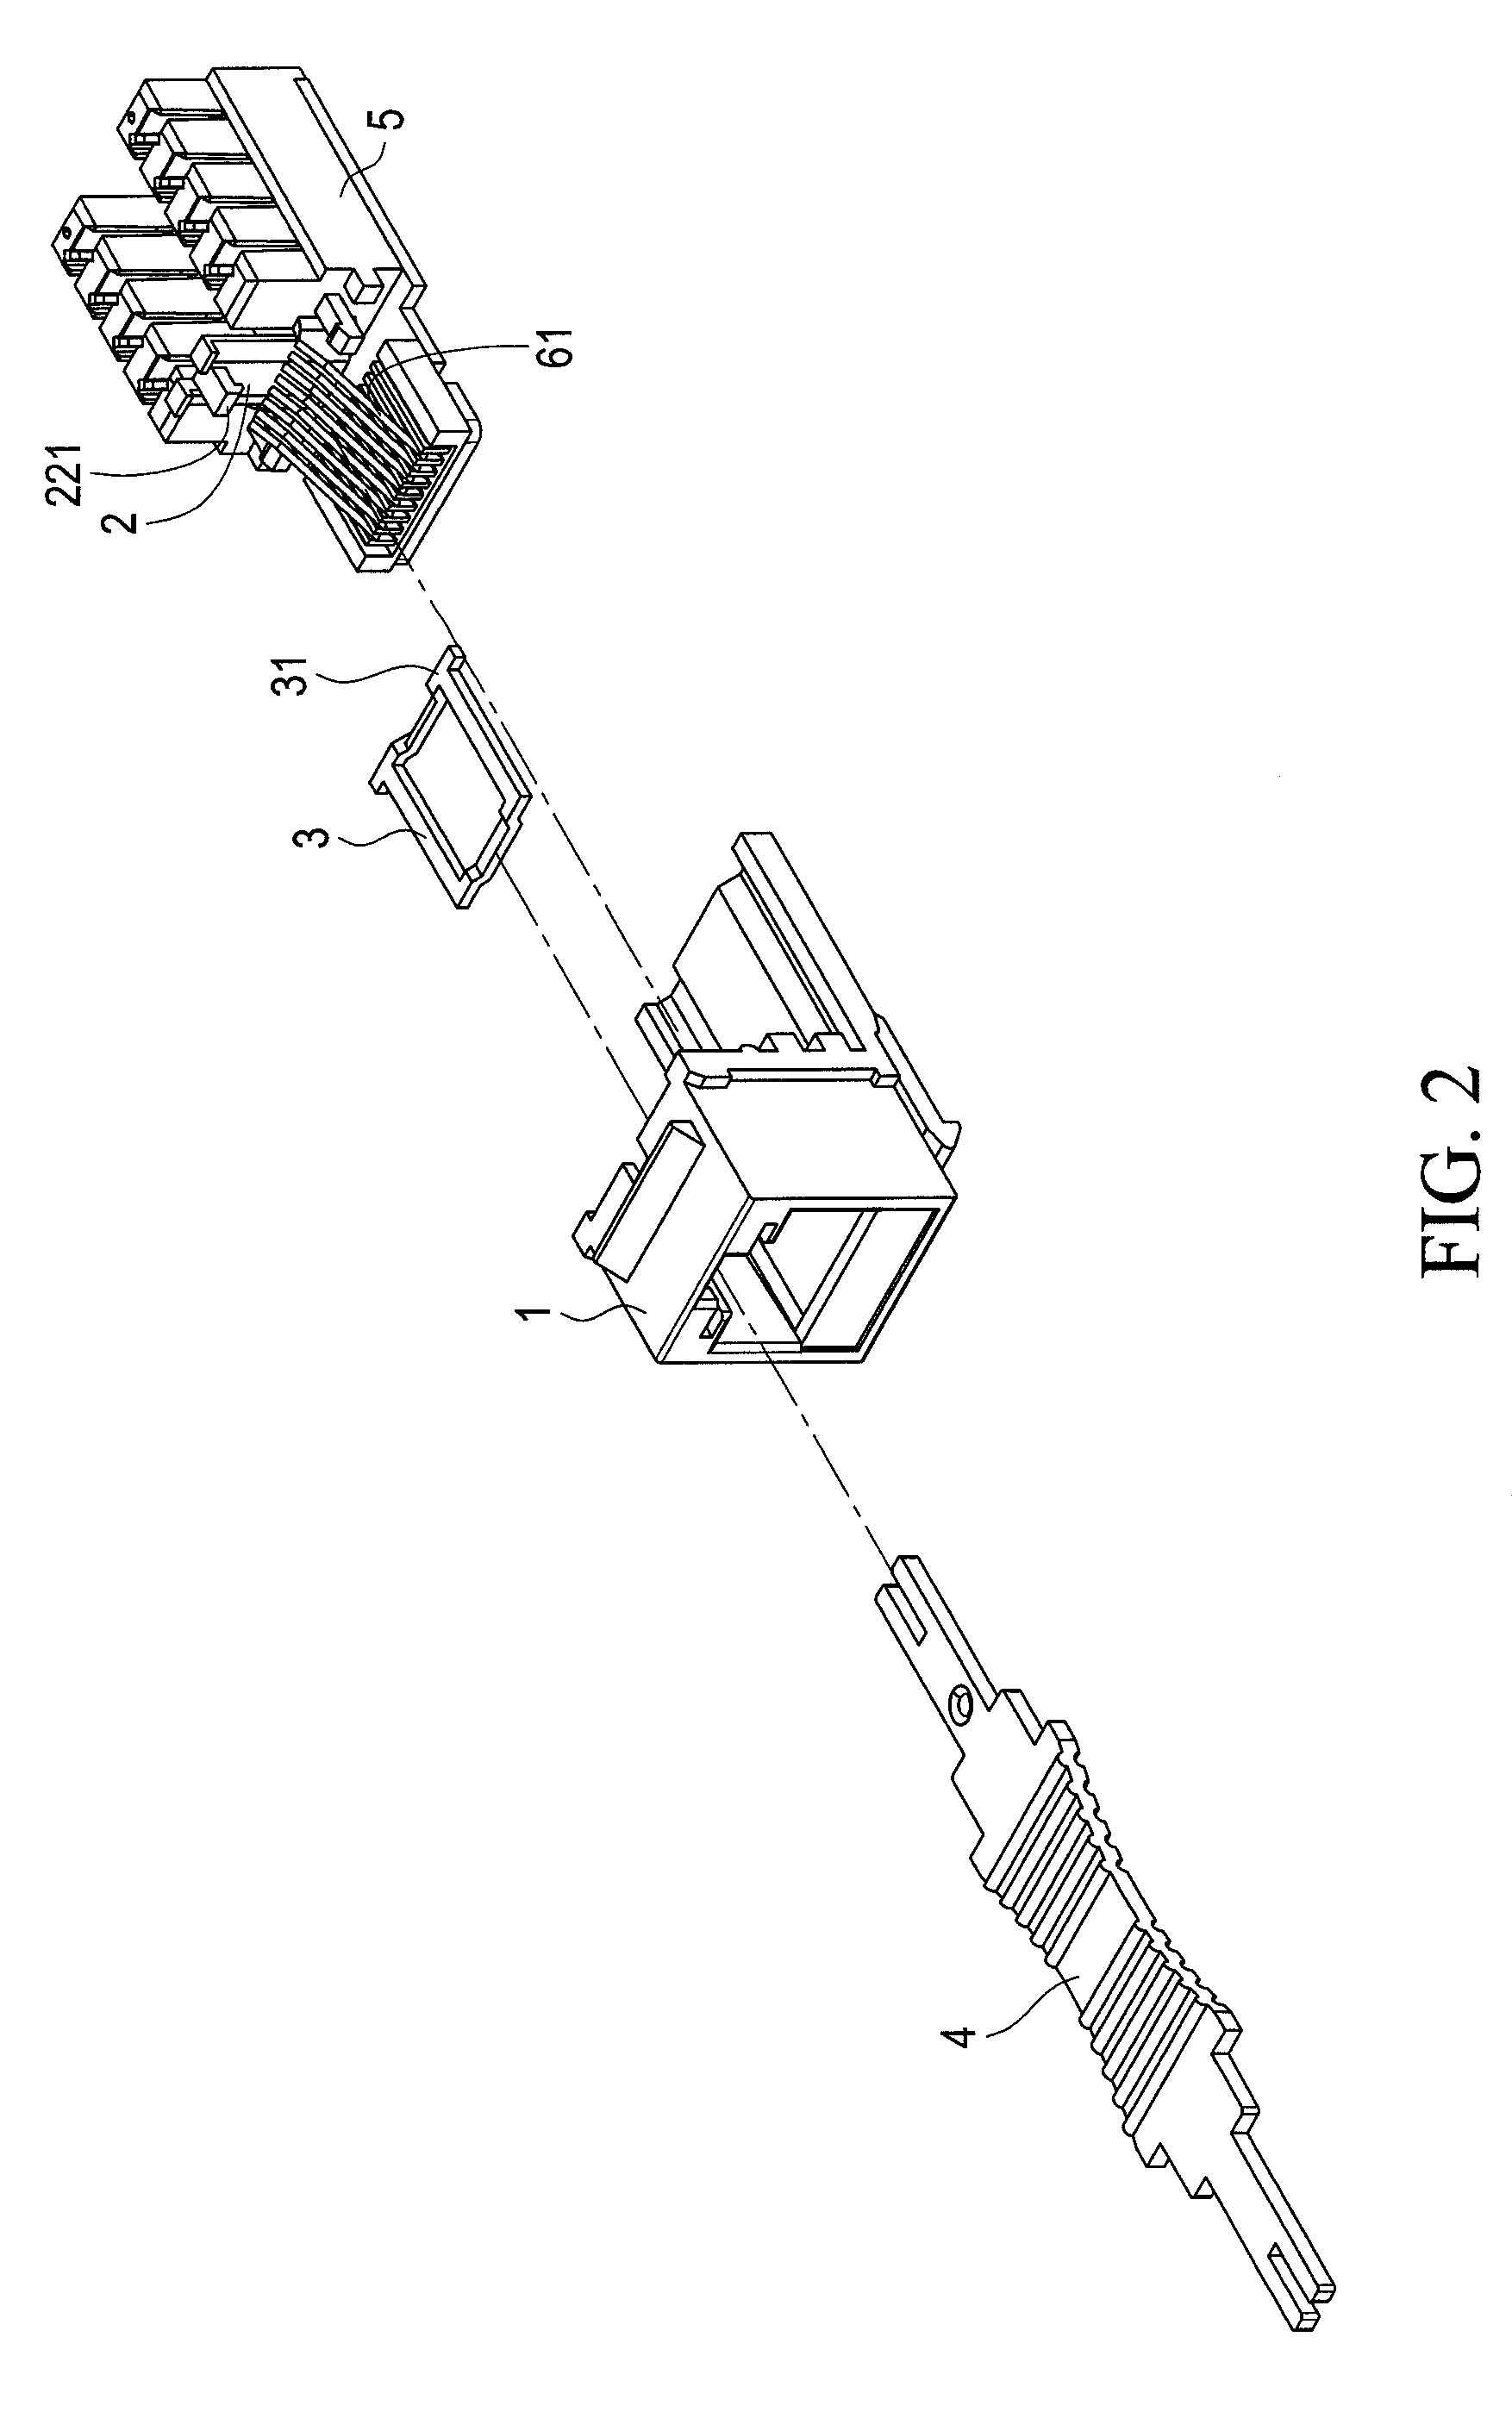 Connection receptacle lock and security structure